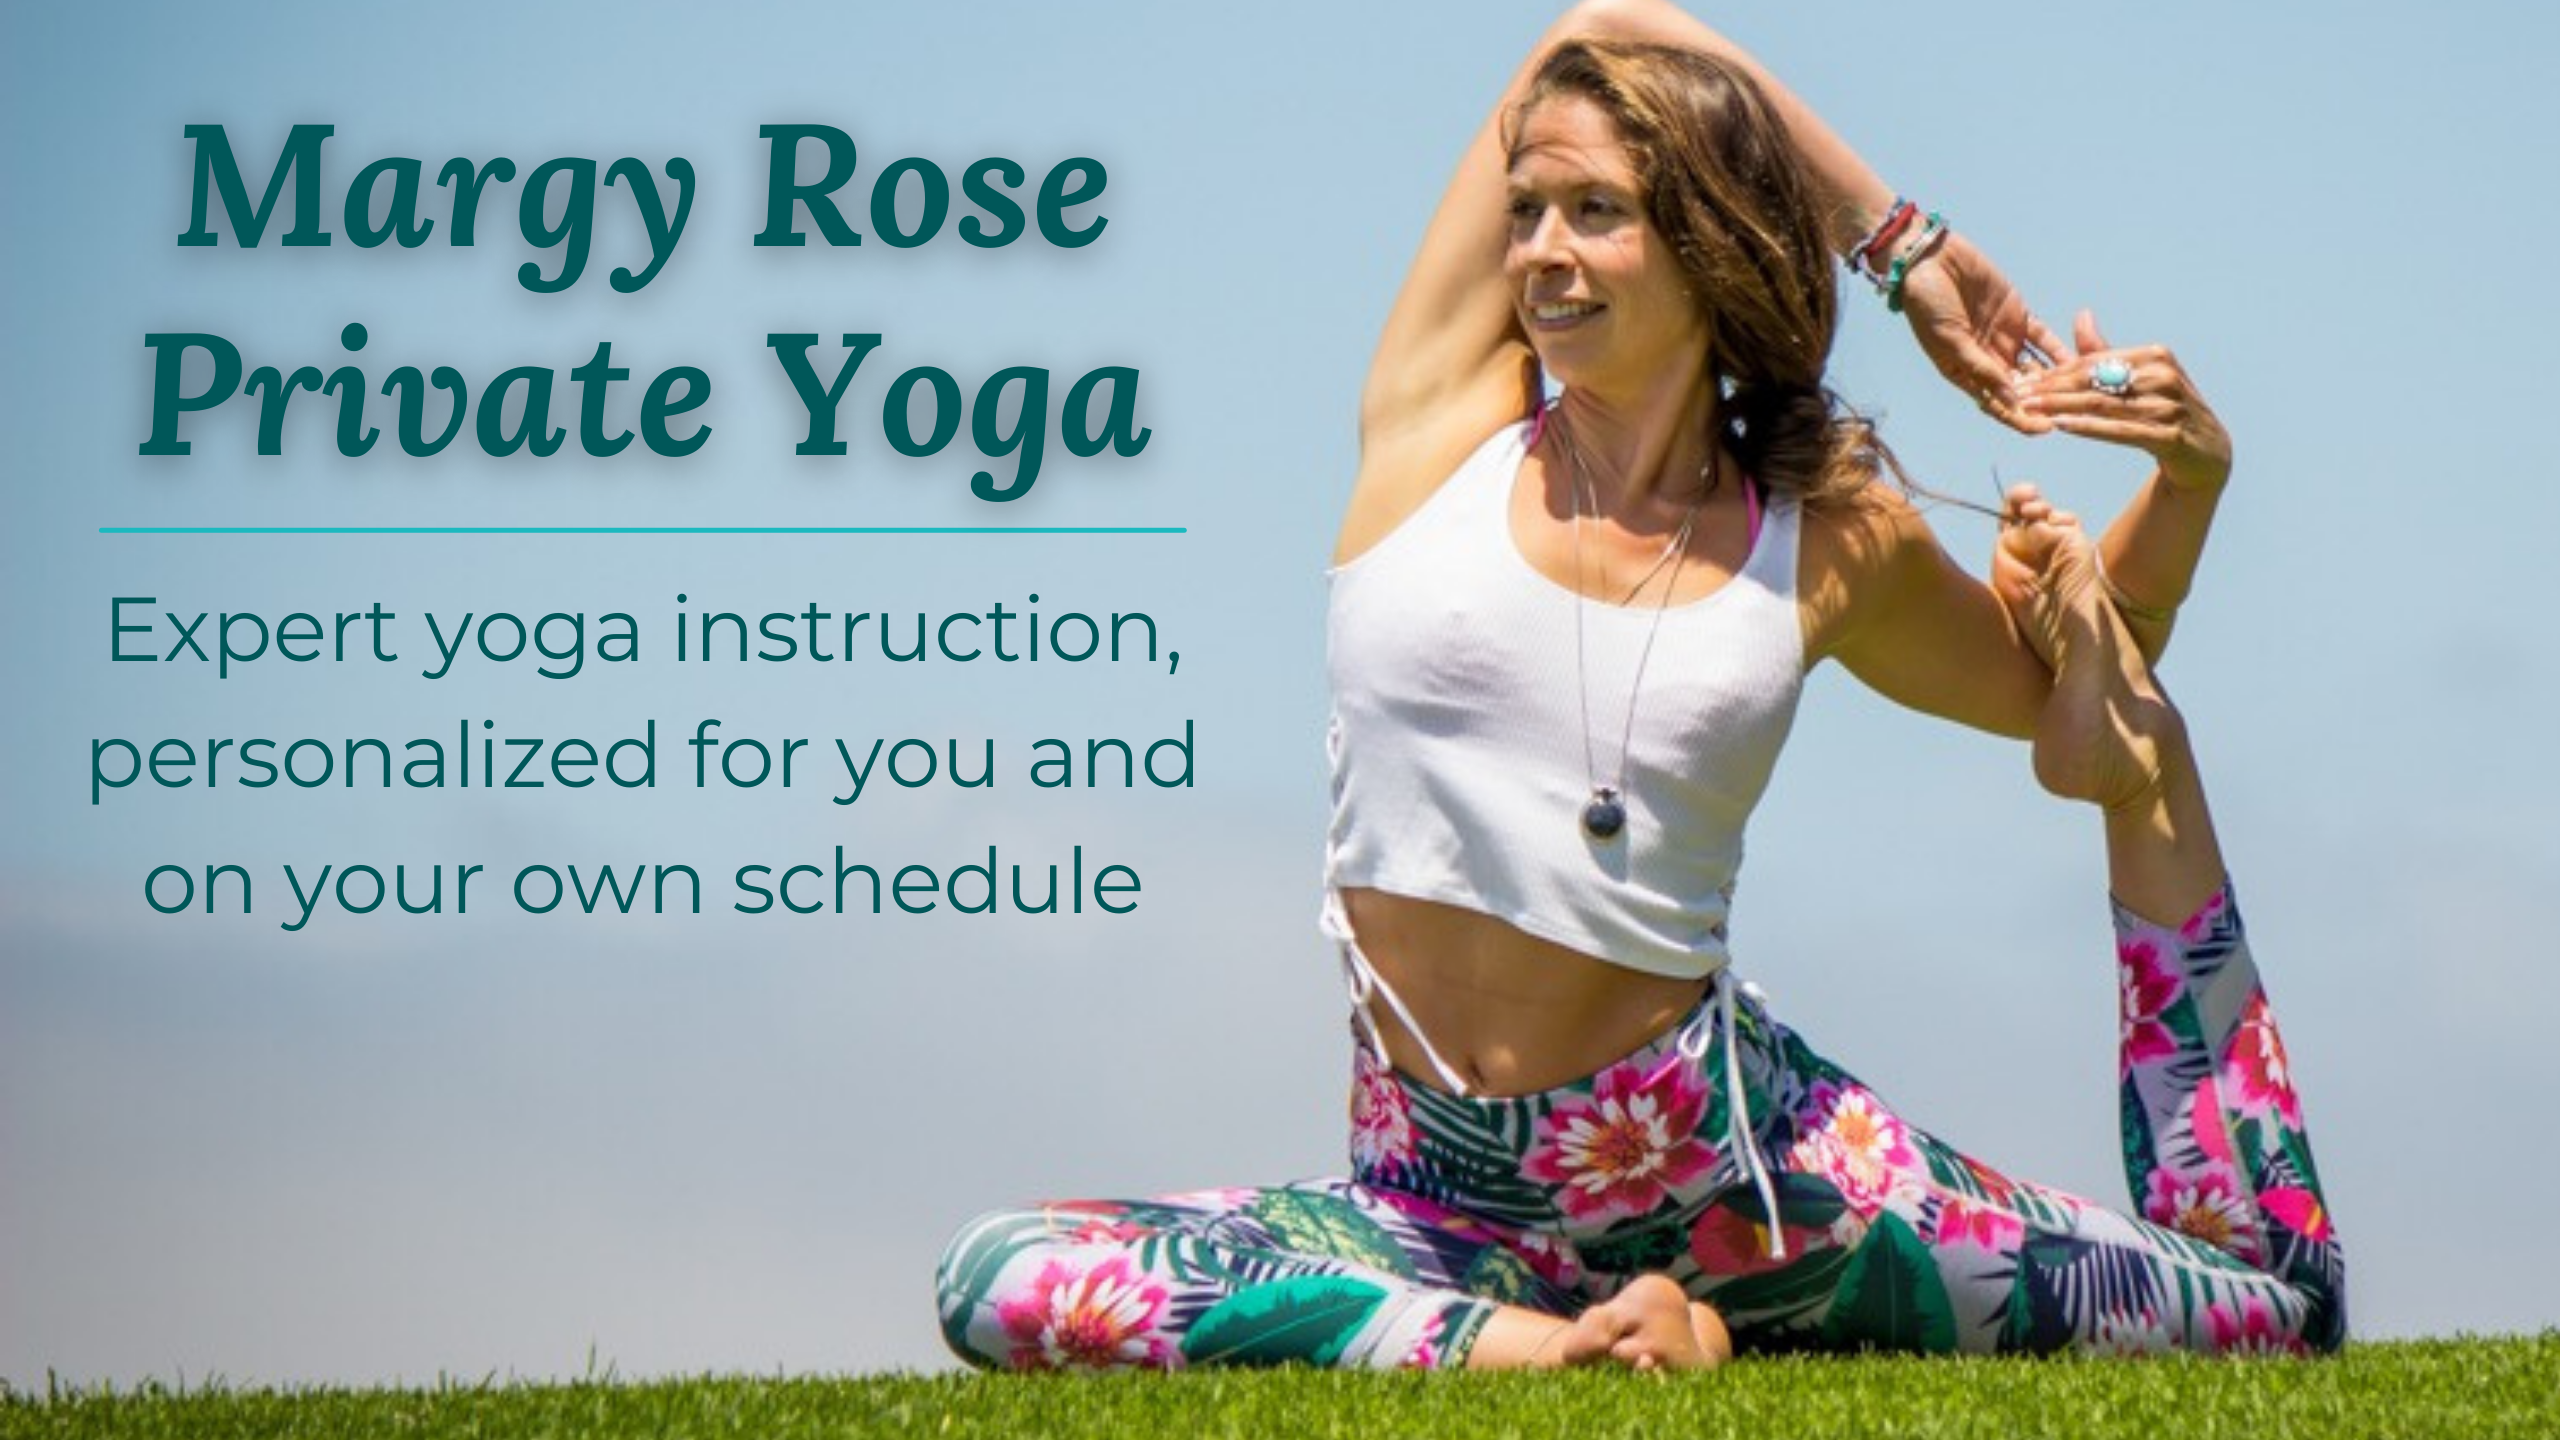 margy rose private yoga-expert yoga, personalized, on your own schedule